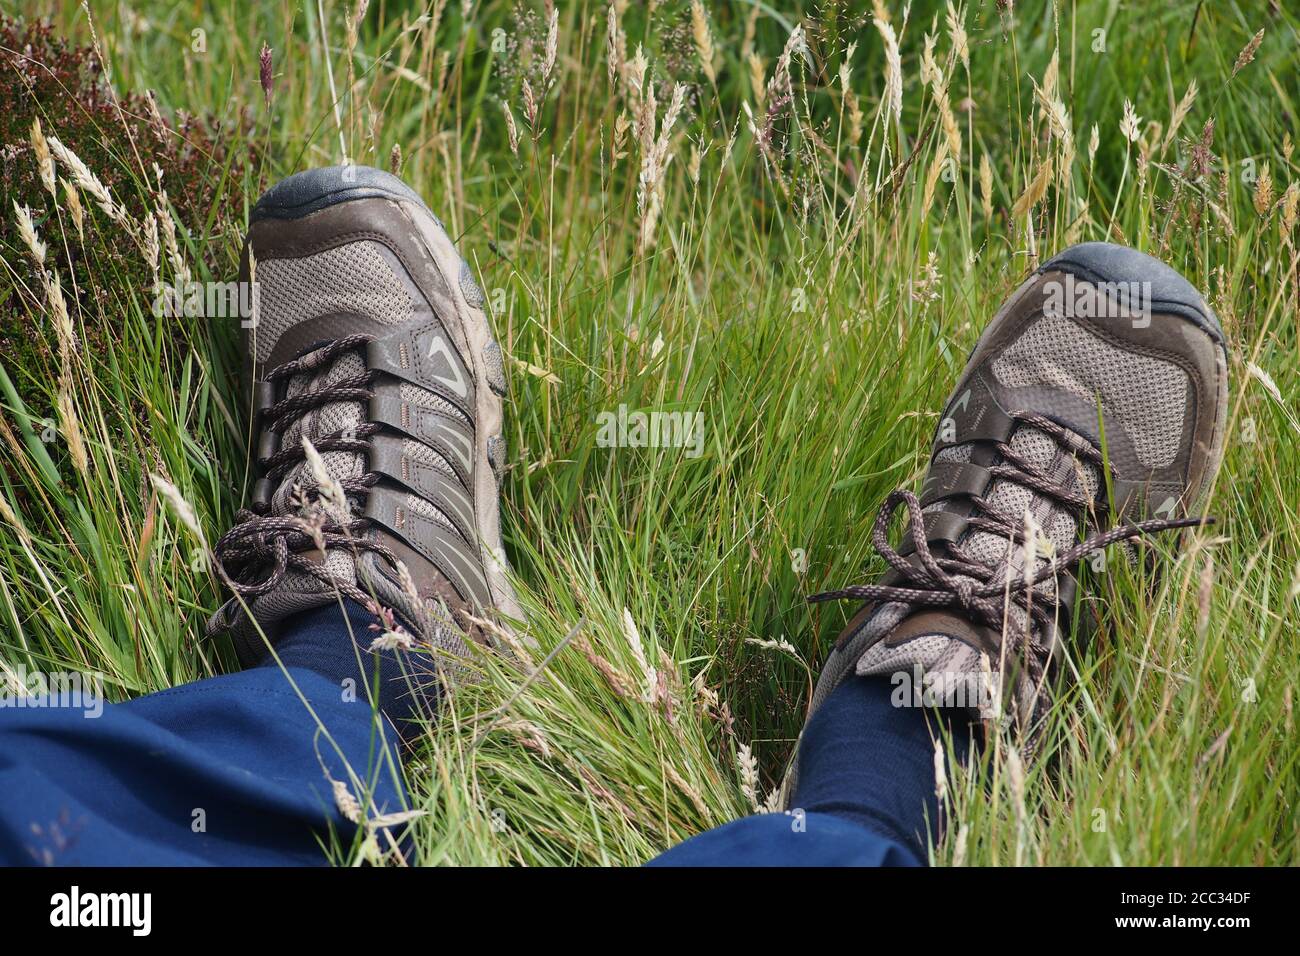 A view of a man's ankles and feet, resting, laying in rough grass wearing blue trousers, blue socks and walking shoes Stock Photo